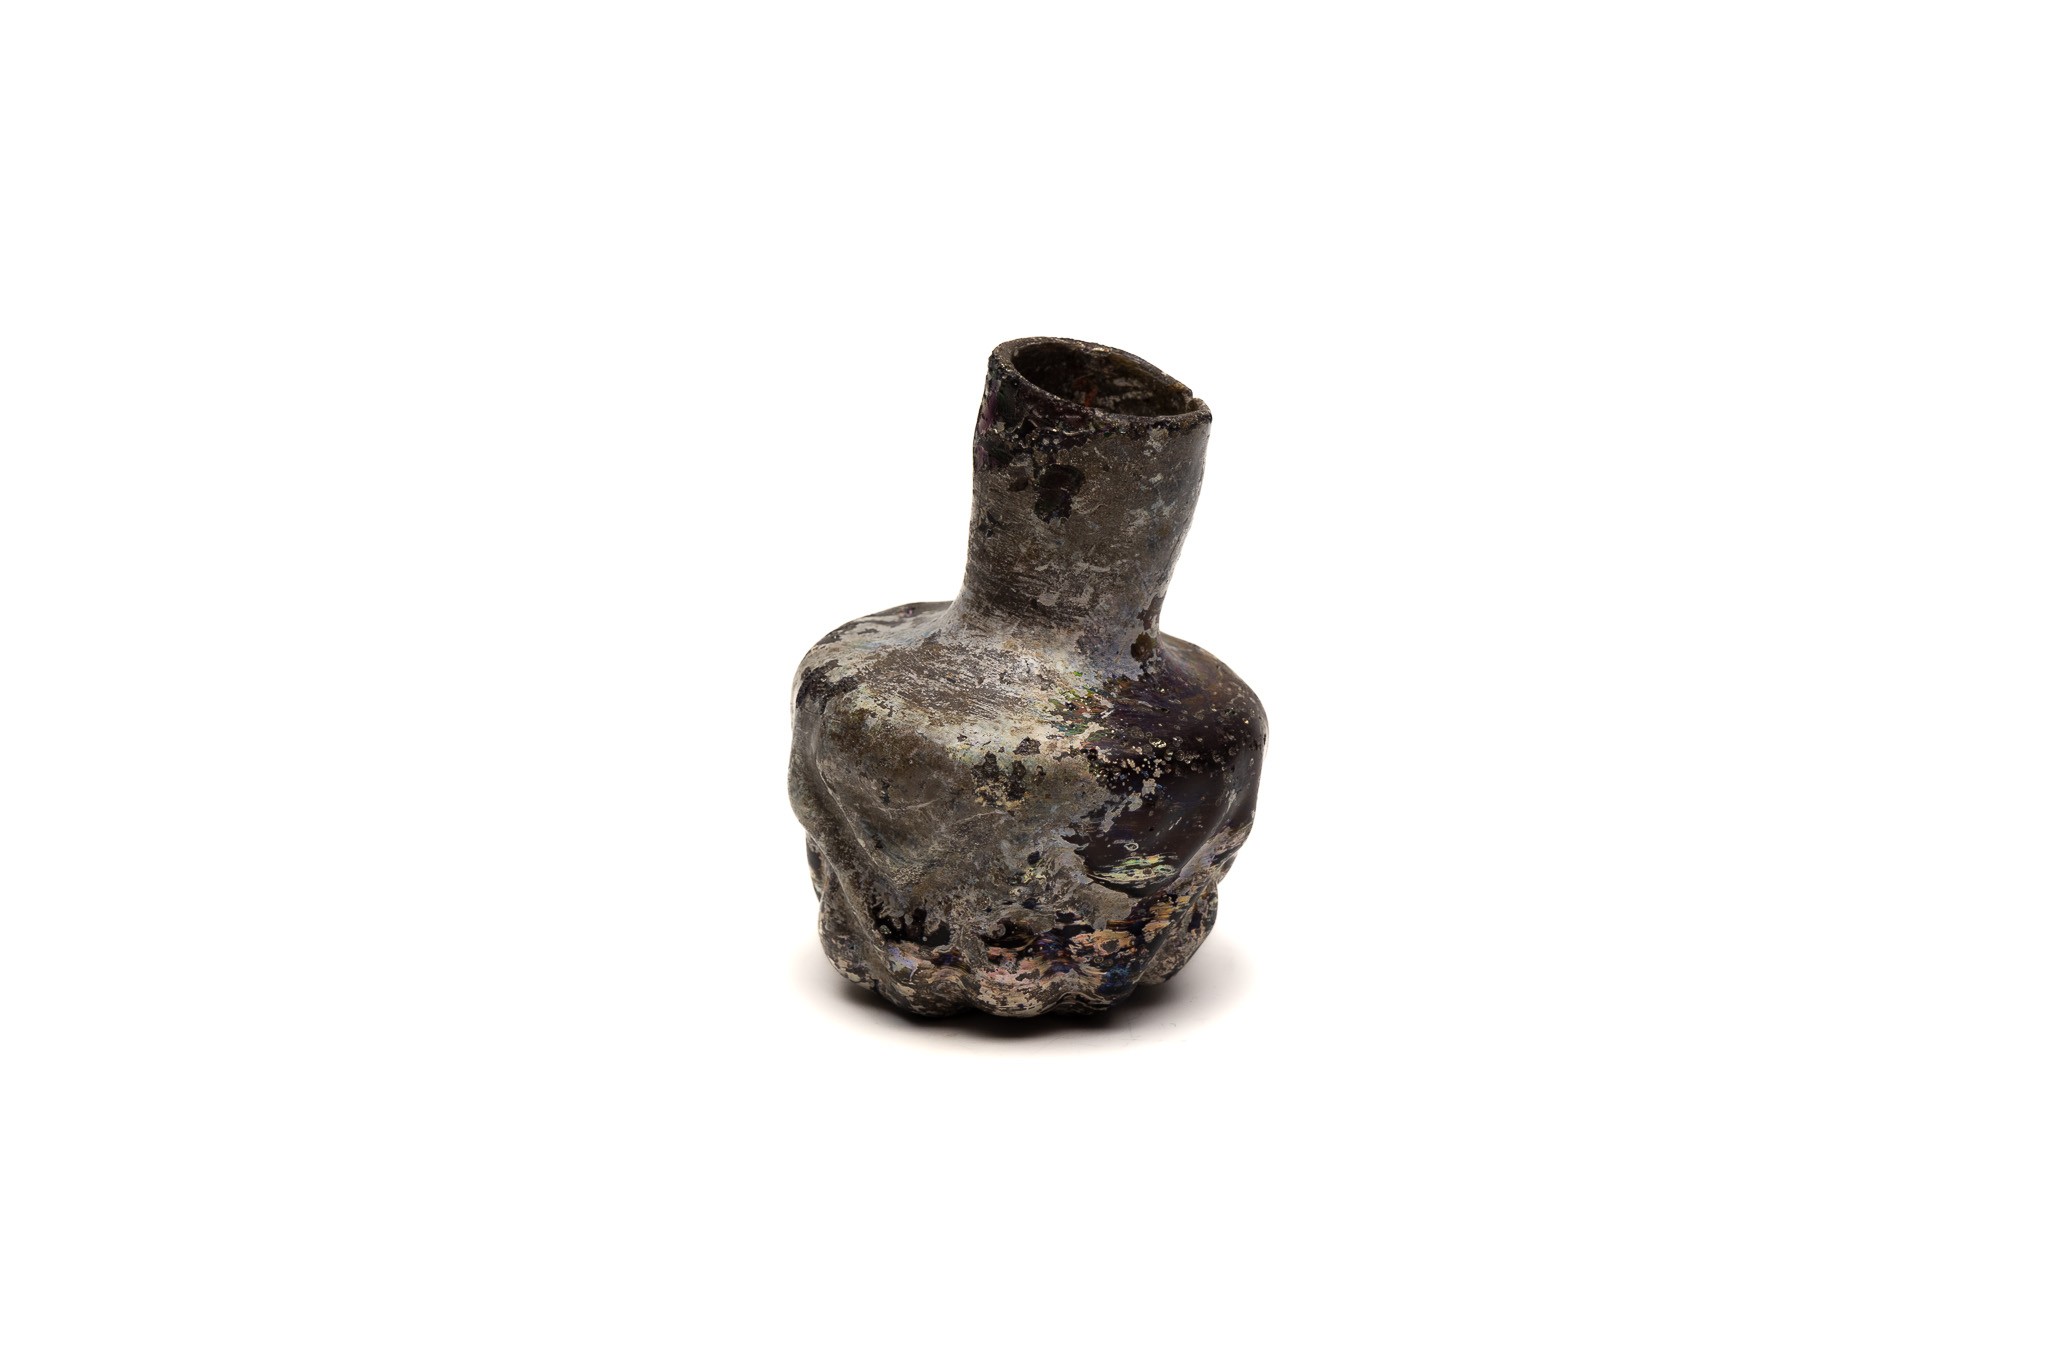 An Islamic Dark Glass Bottle with Lovely Patina and Design from the 11-12th Century.

H: Approximate